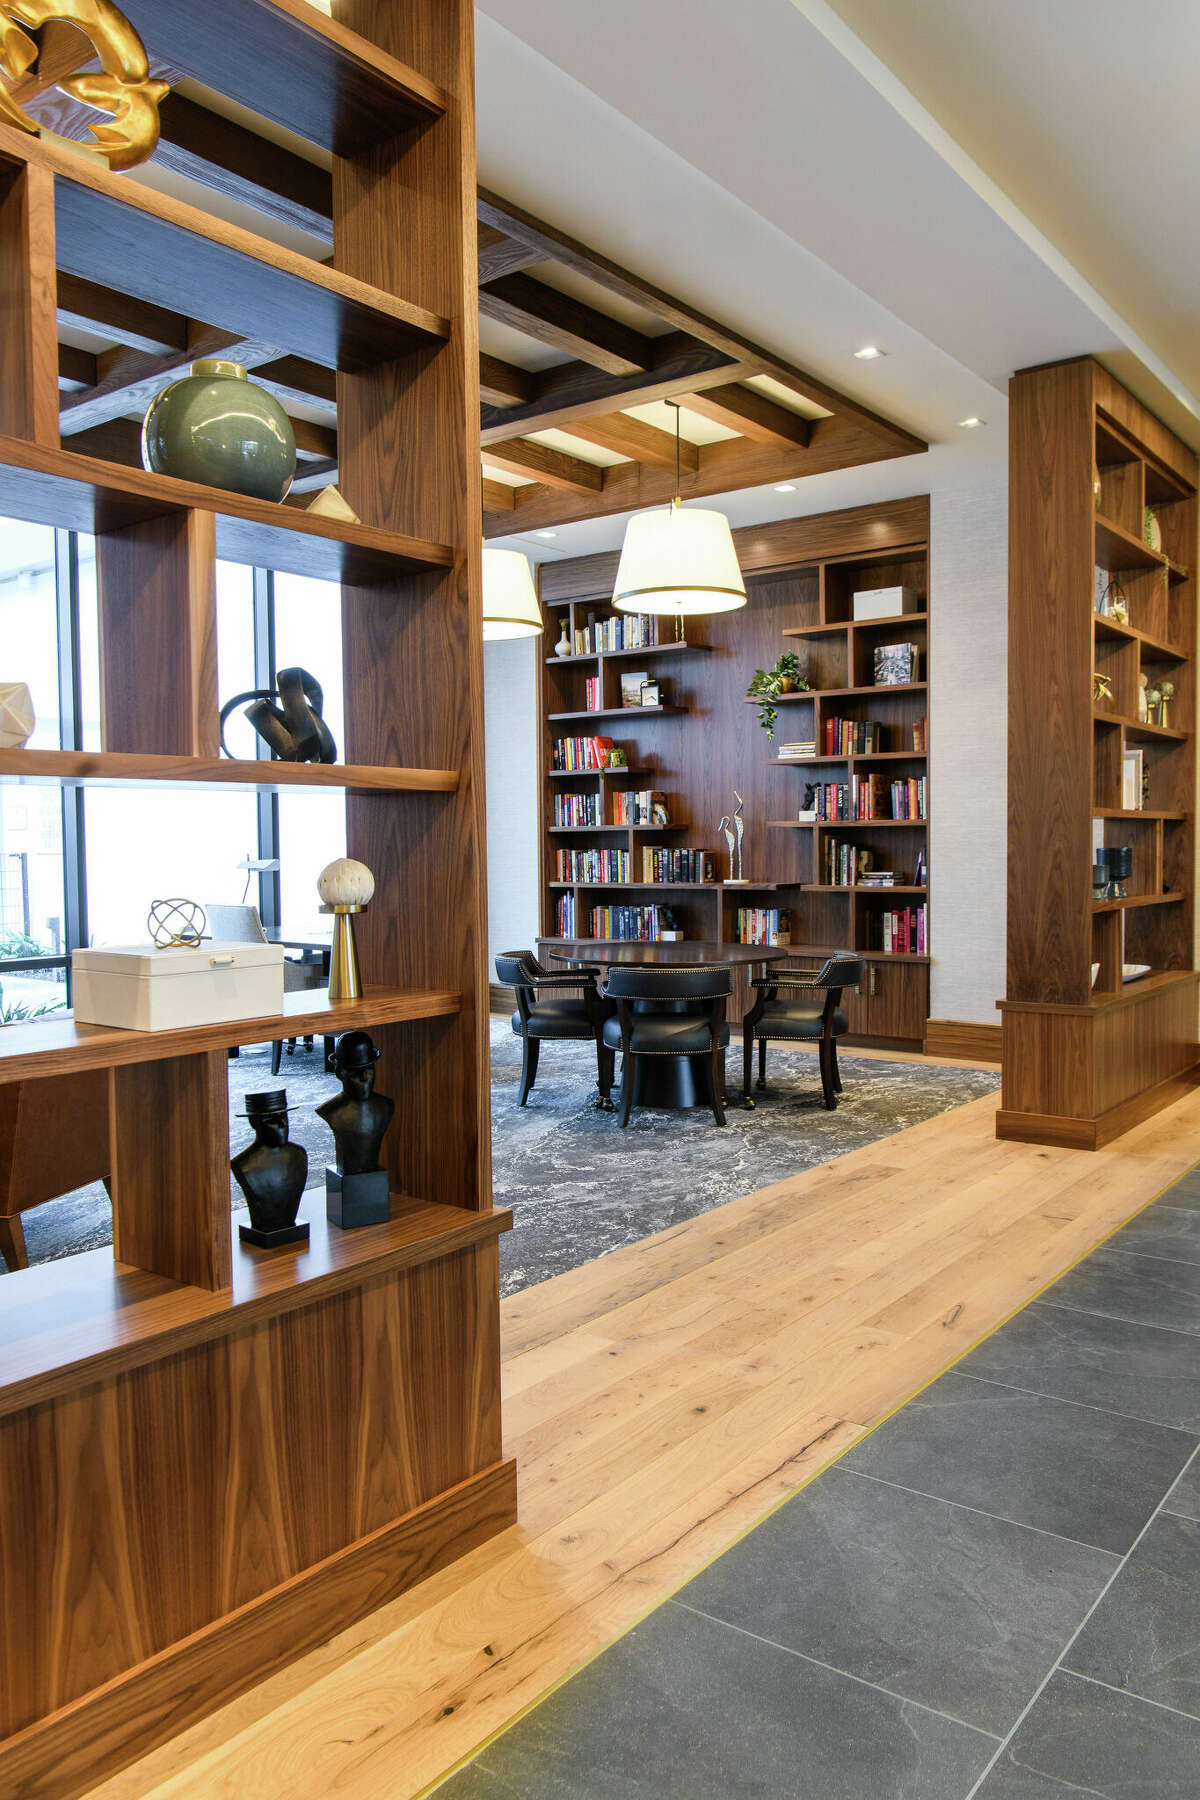 The library at The Watermark at Houston Heights.